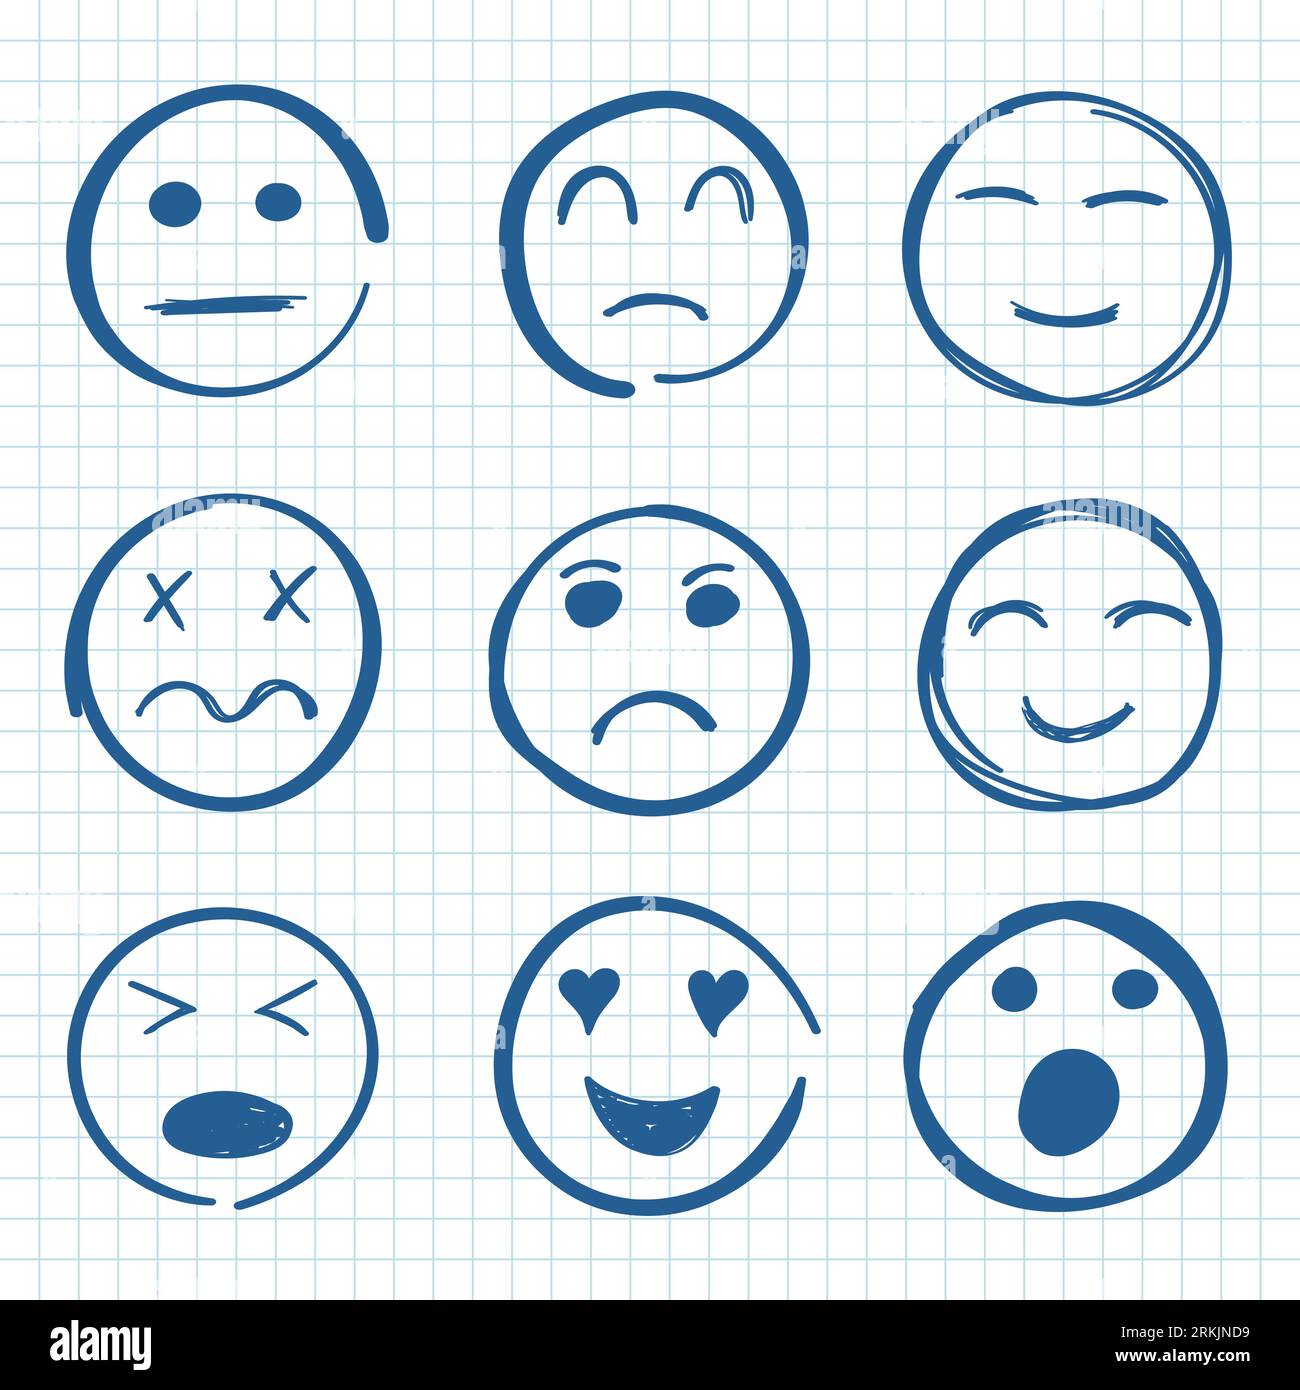 Emojis faces icon in hand drawn style. Doddle emoticons vector illustration on isolated background. Happy and sad face sign business concept. Stock Vector